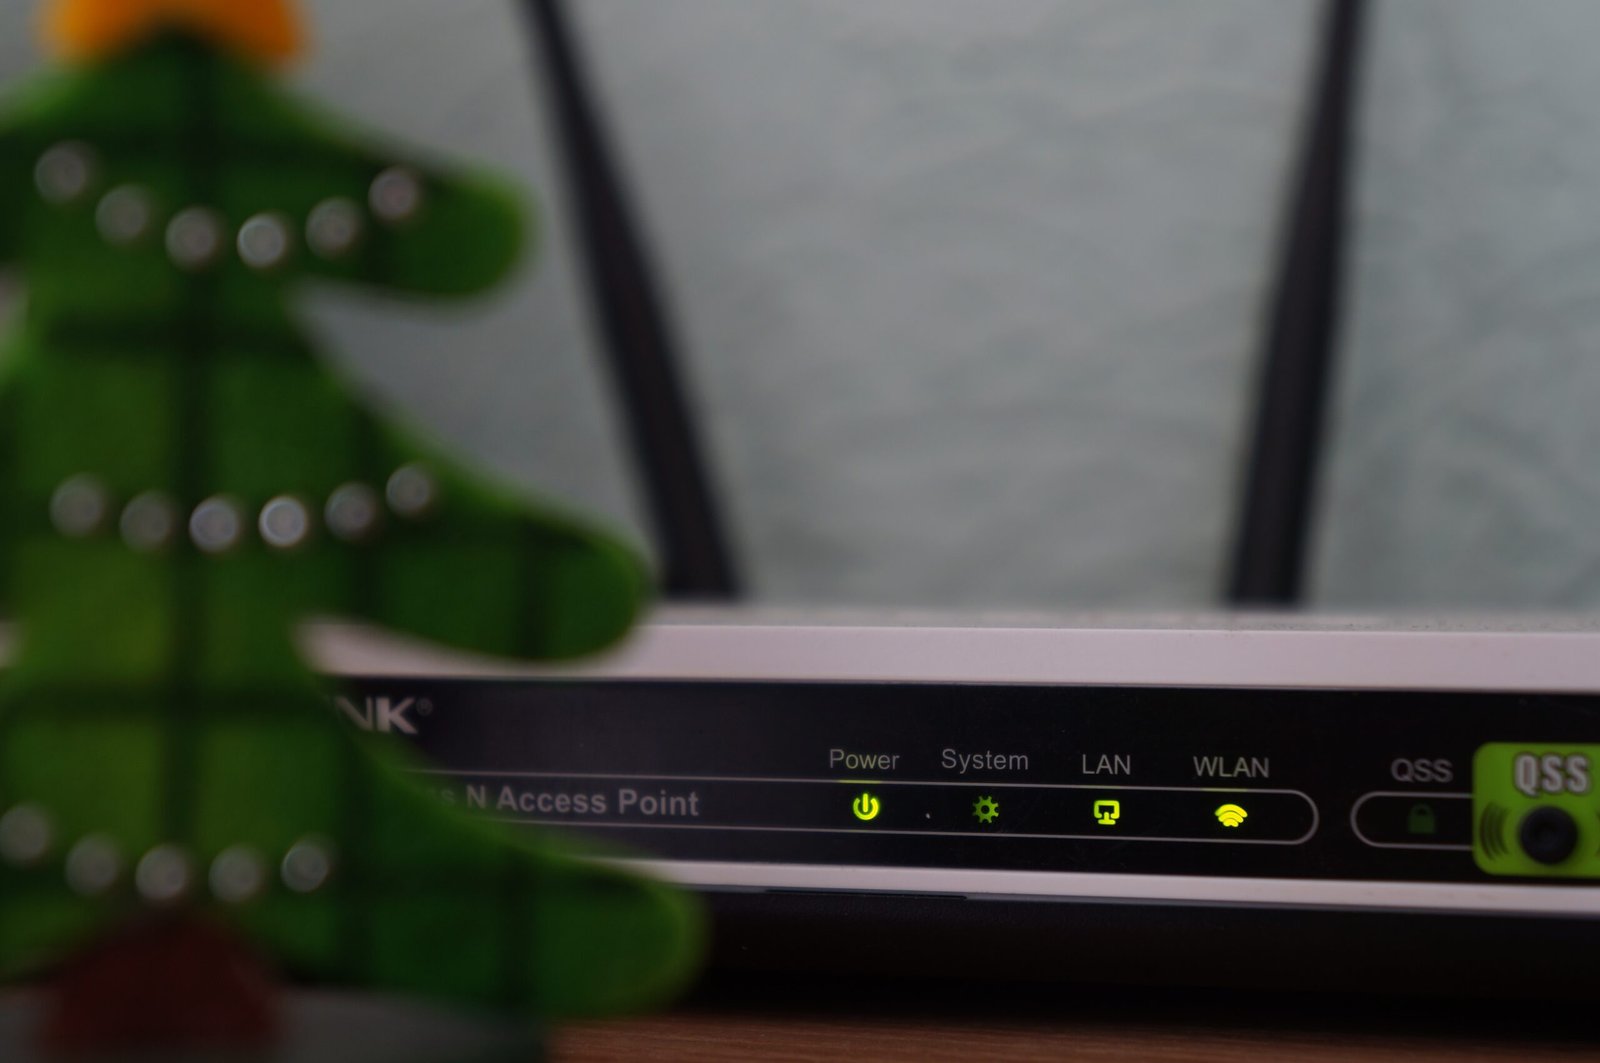 white-and-black-modem-router-with-four-lights-scaled Home